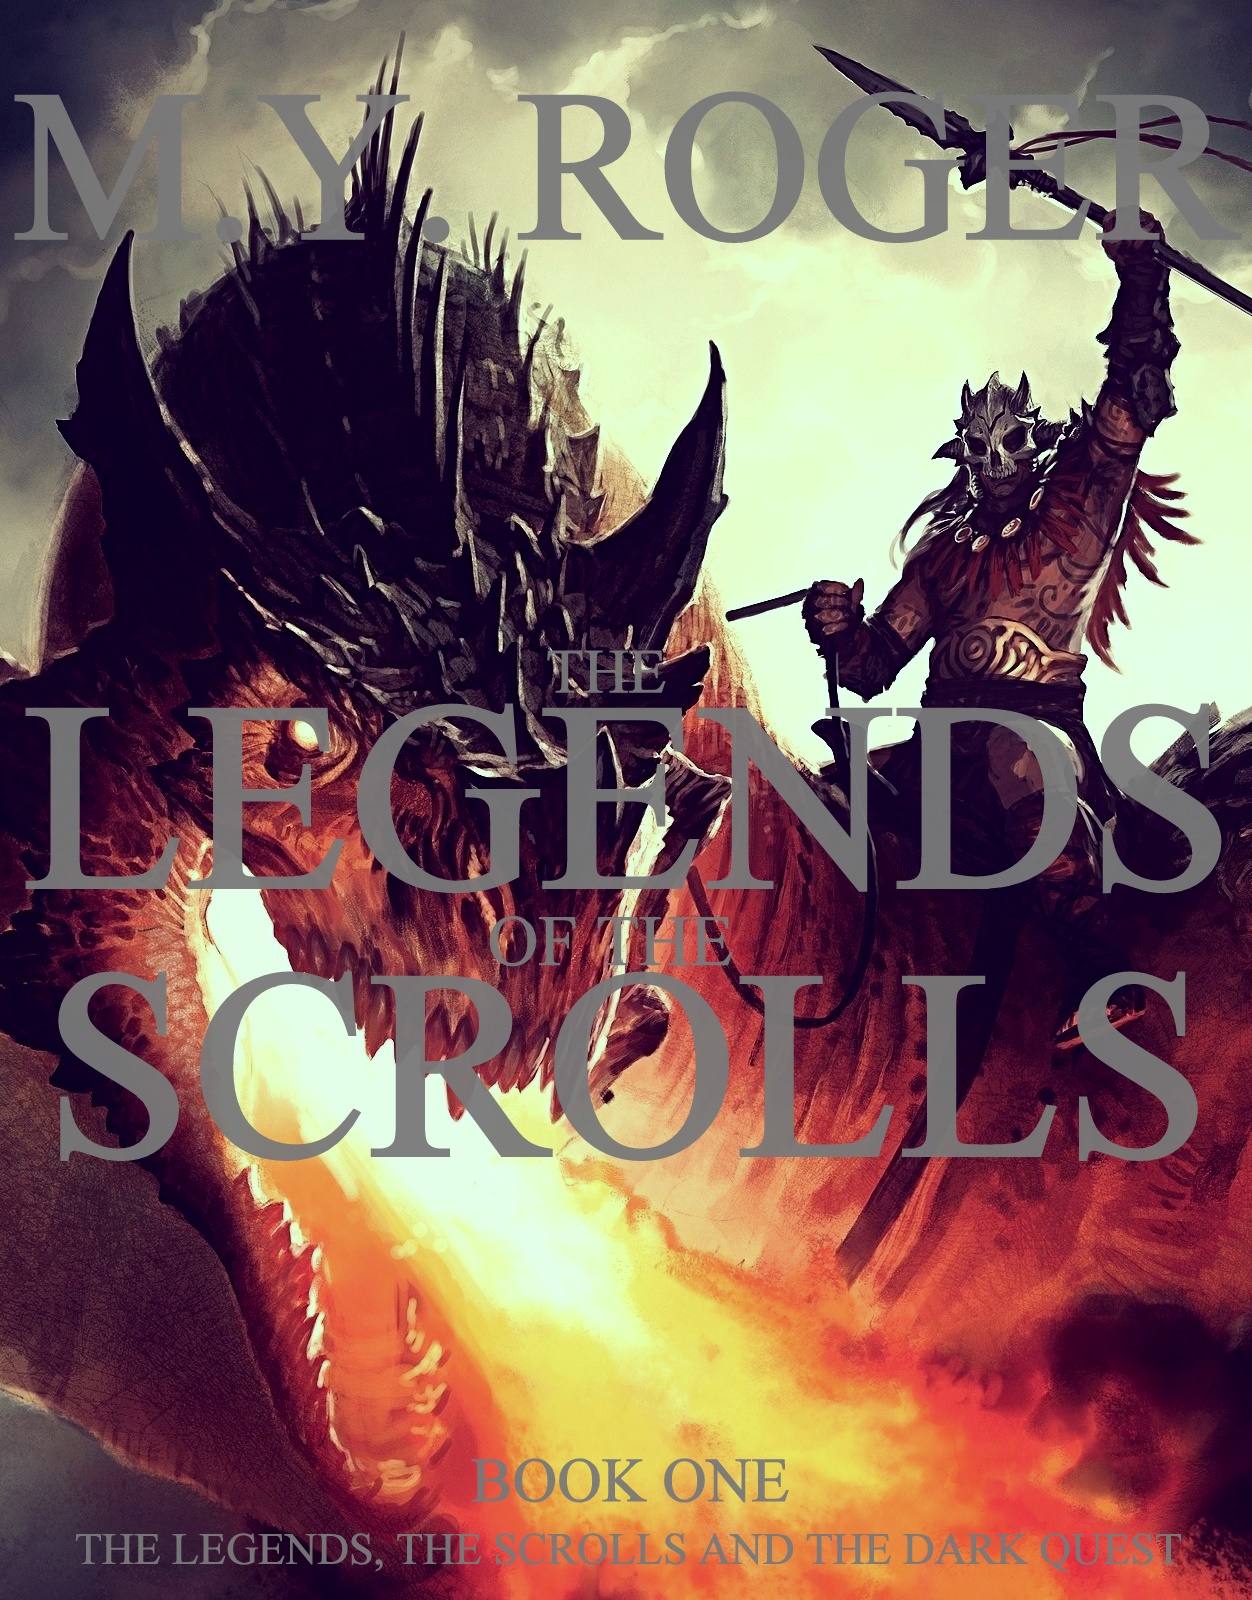 the legends of the scrolls